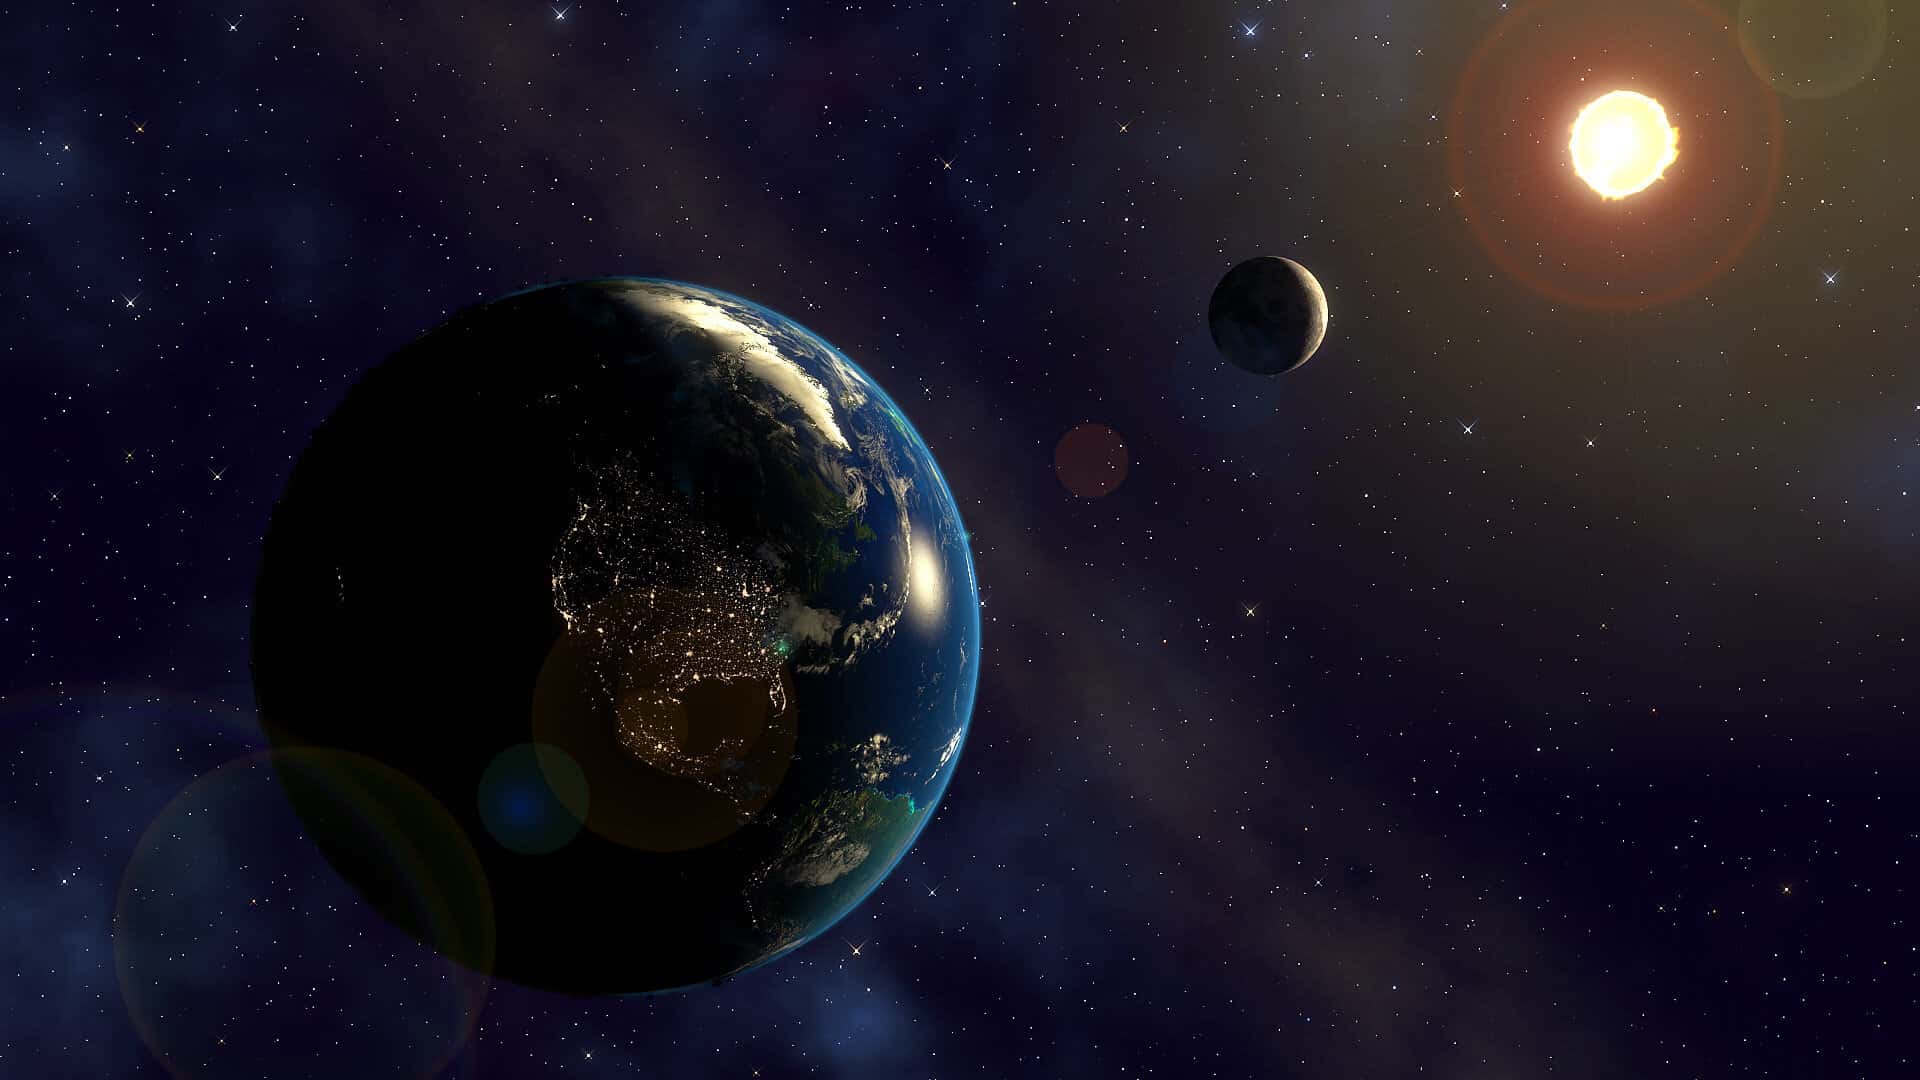 Earth and the moon